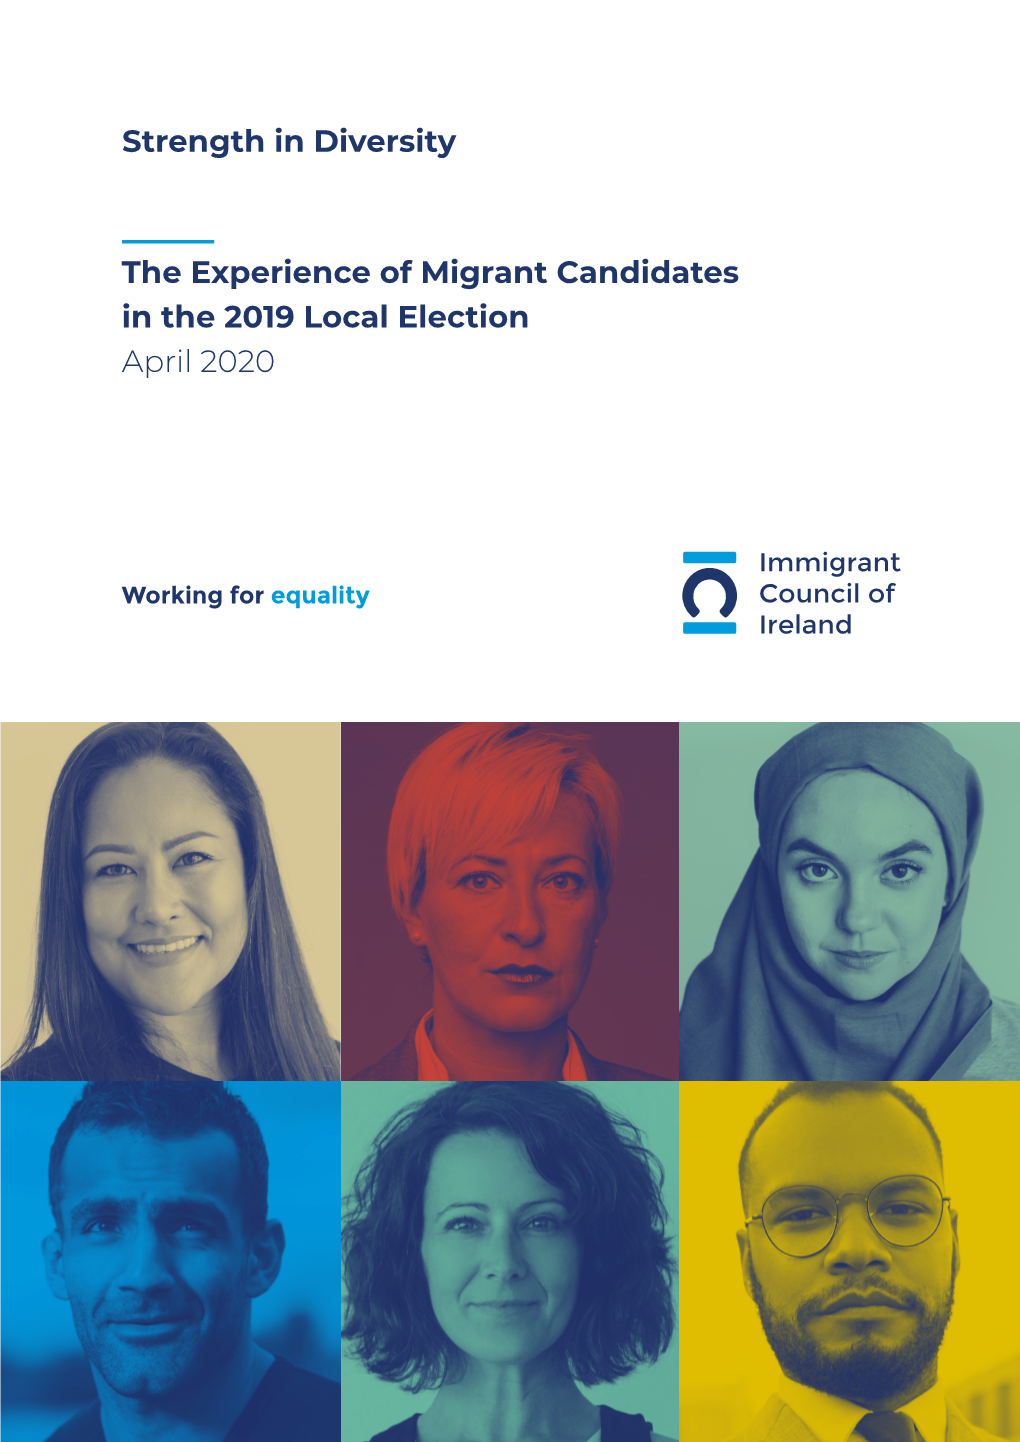 The Experience of Migrant Candidates in the 2019 Local Election April 2020 Strength in Diversity